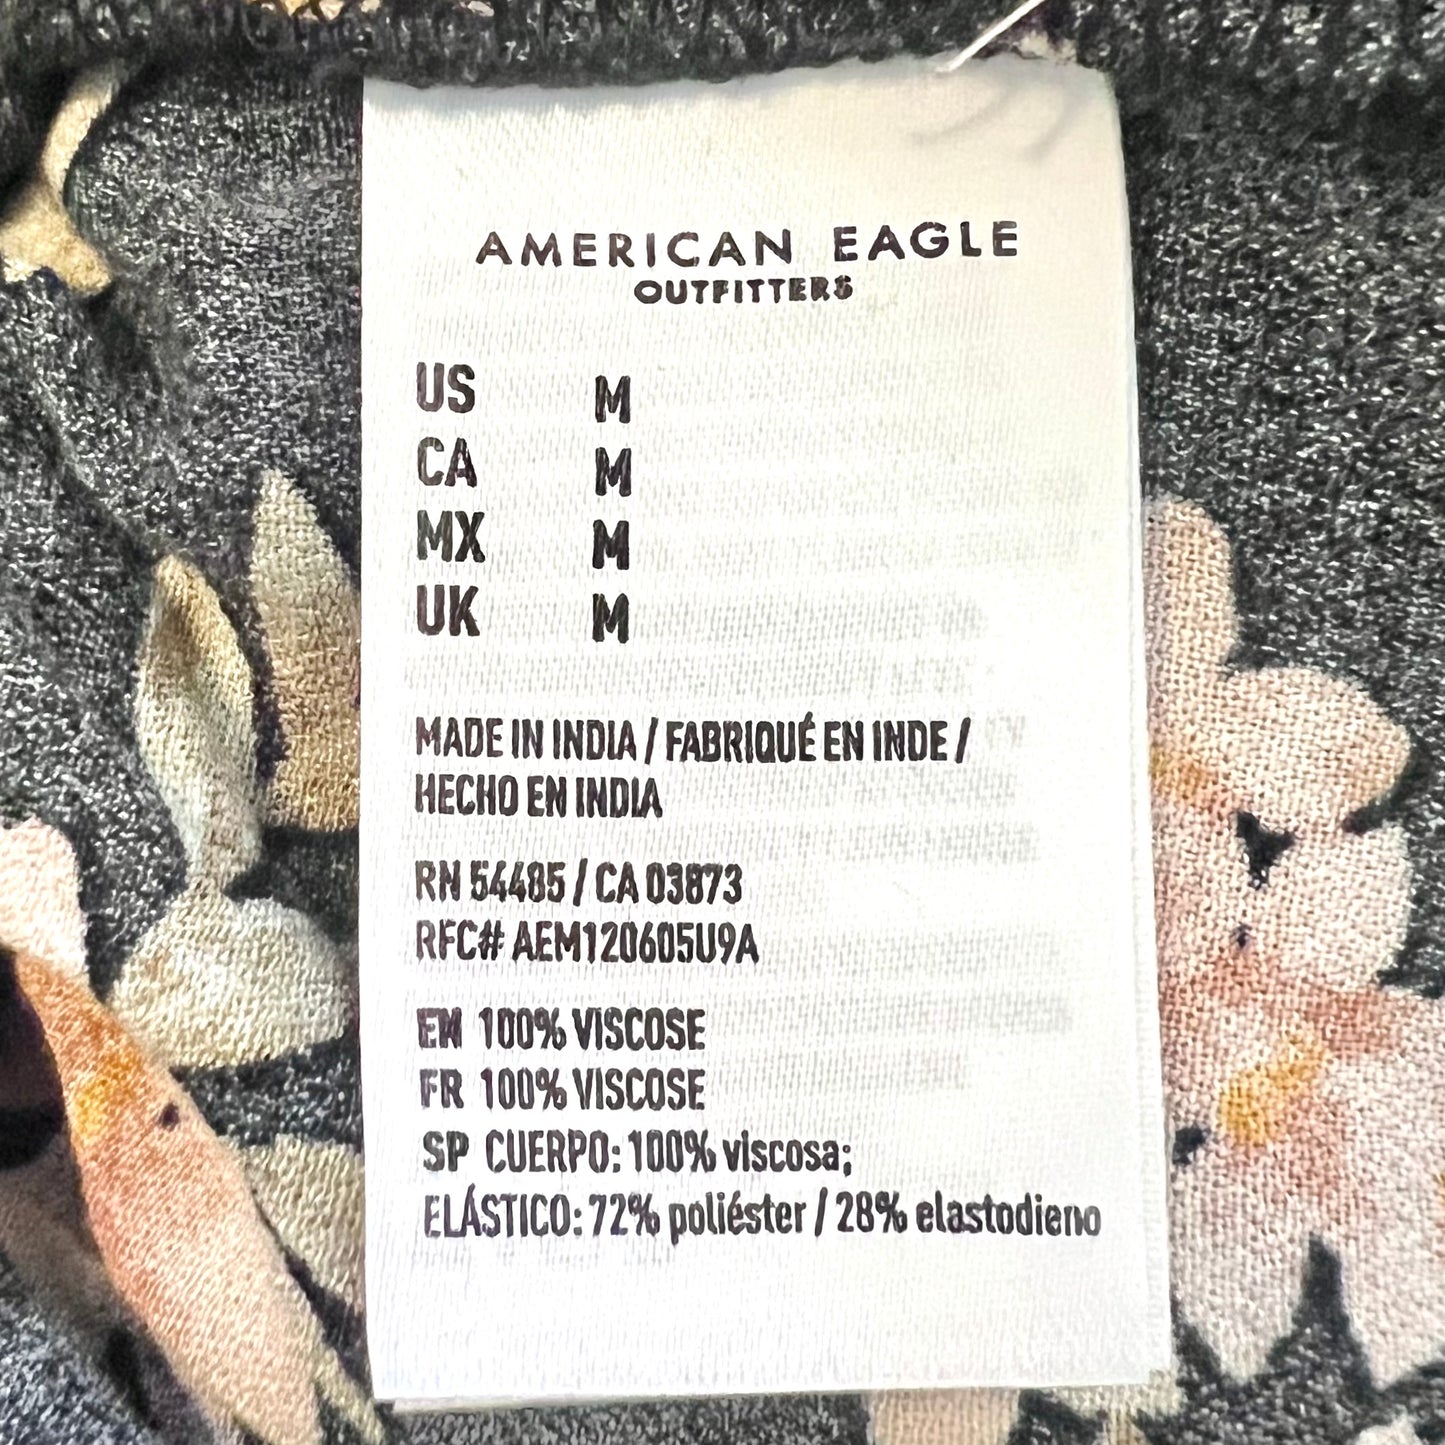 Shorts By American Eagle  Size: 10